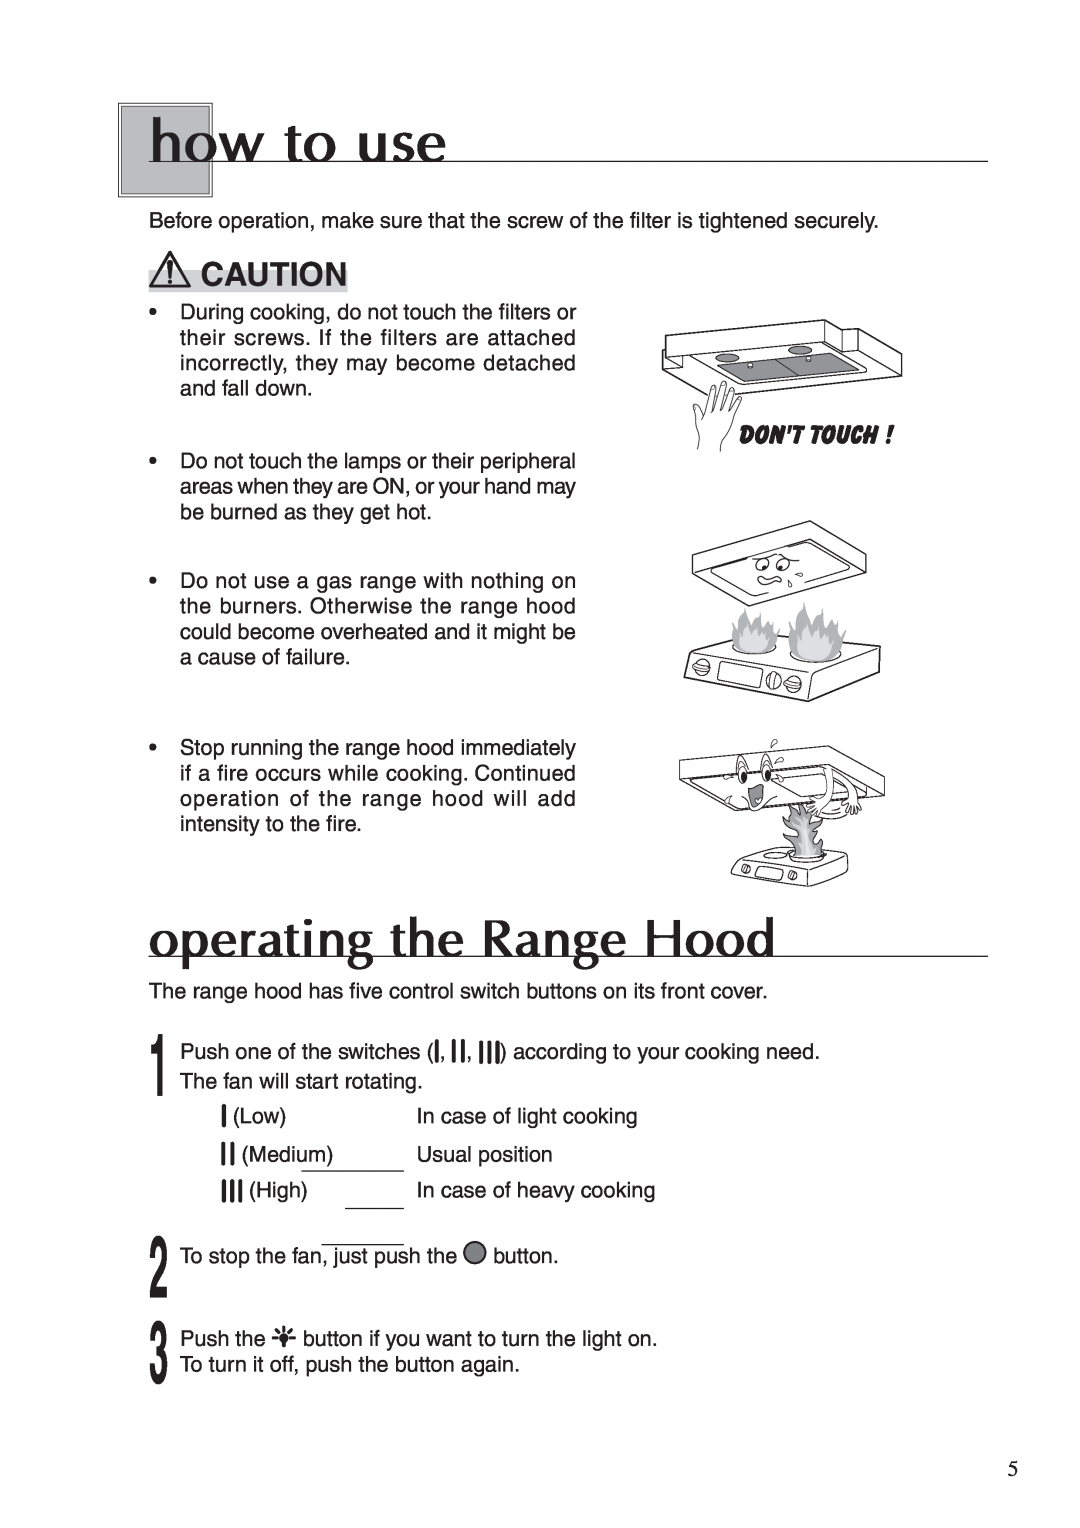 Fujioh BUF-03A operation manual how to use, operating the Range Hood 